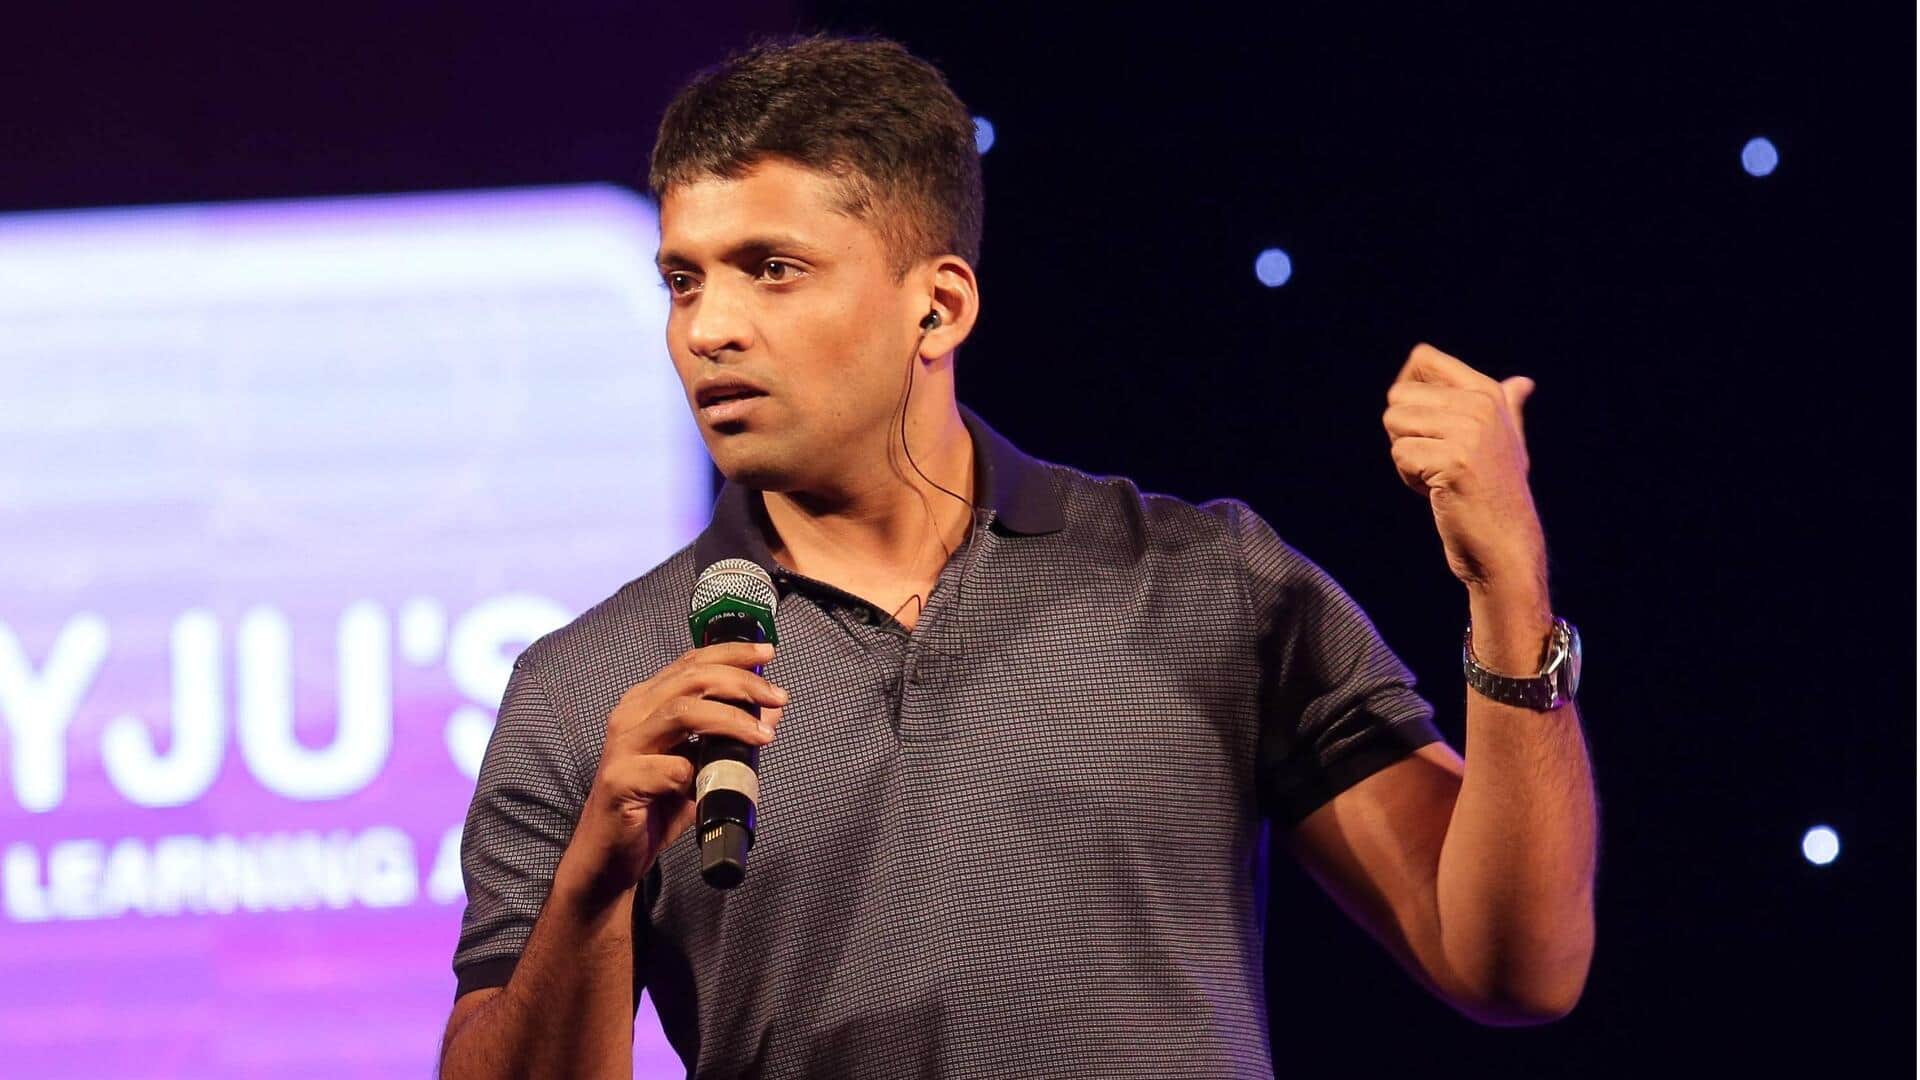 BYJU'S accuses investors of 'conspiring' against company, delays employee salaries